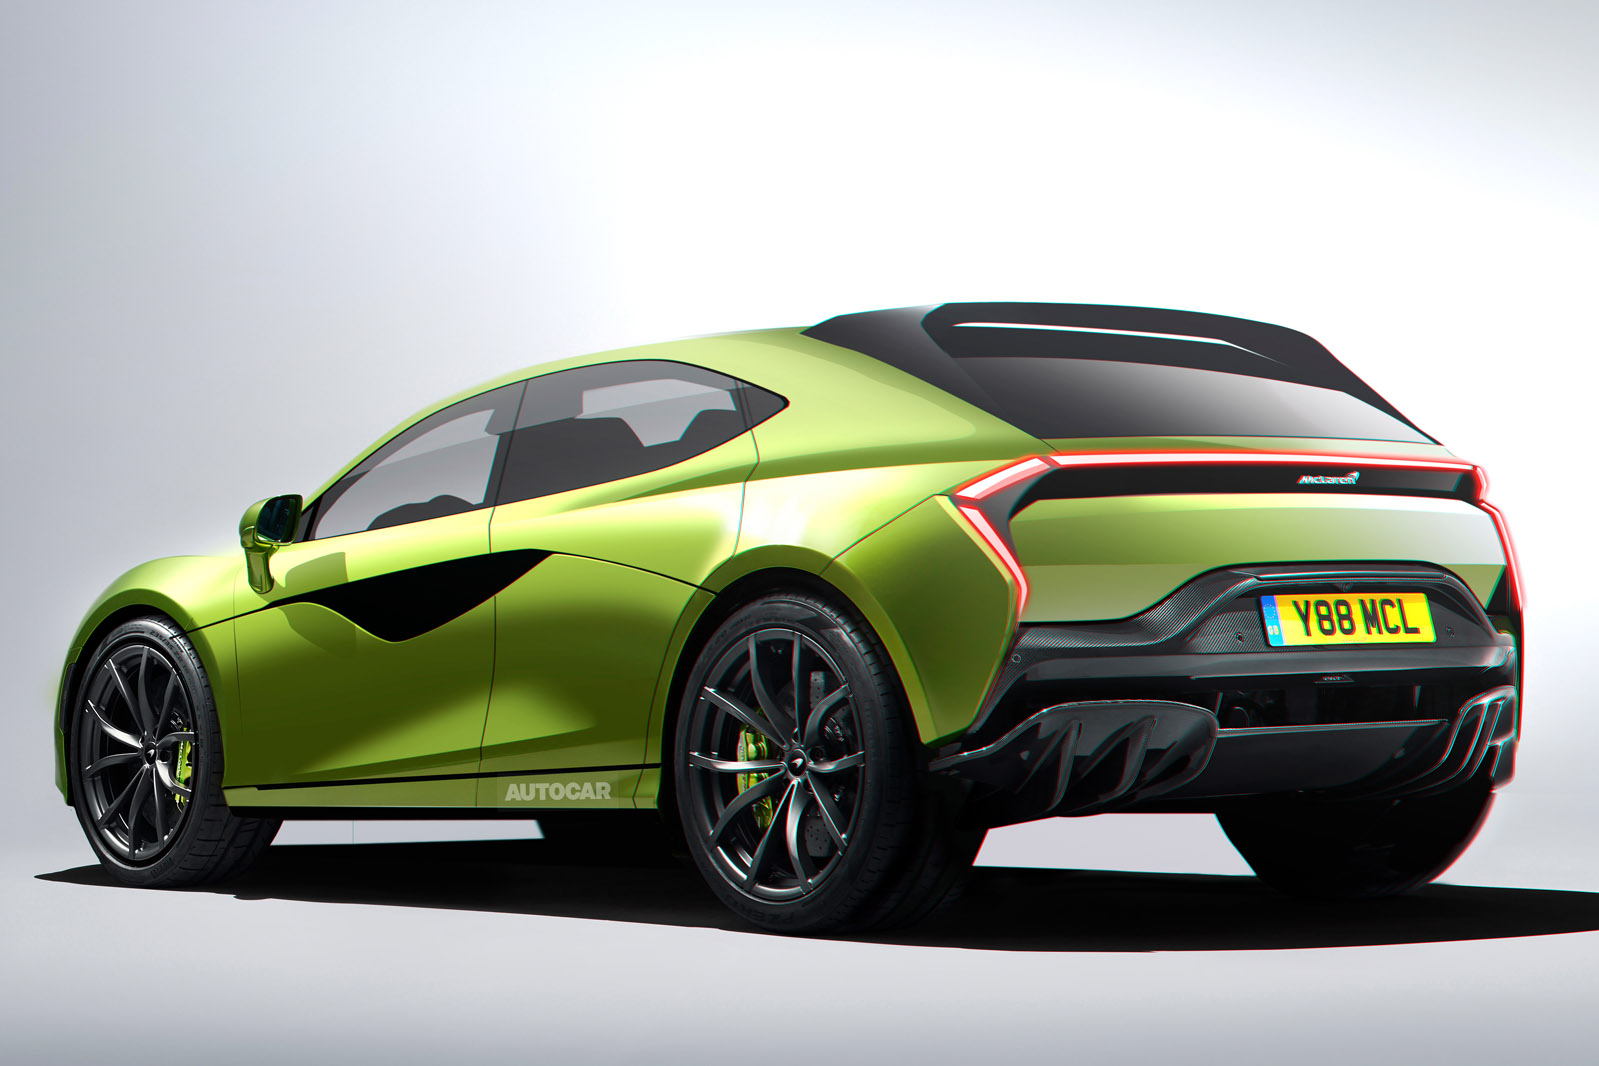 Upcoming Premium Electric SUV Concept Set to Debut at Munich Motor Show in September